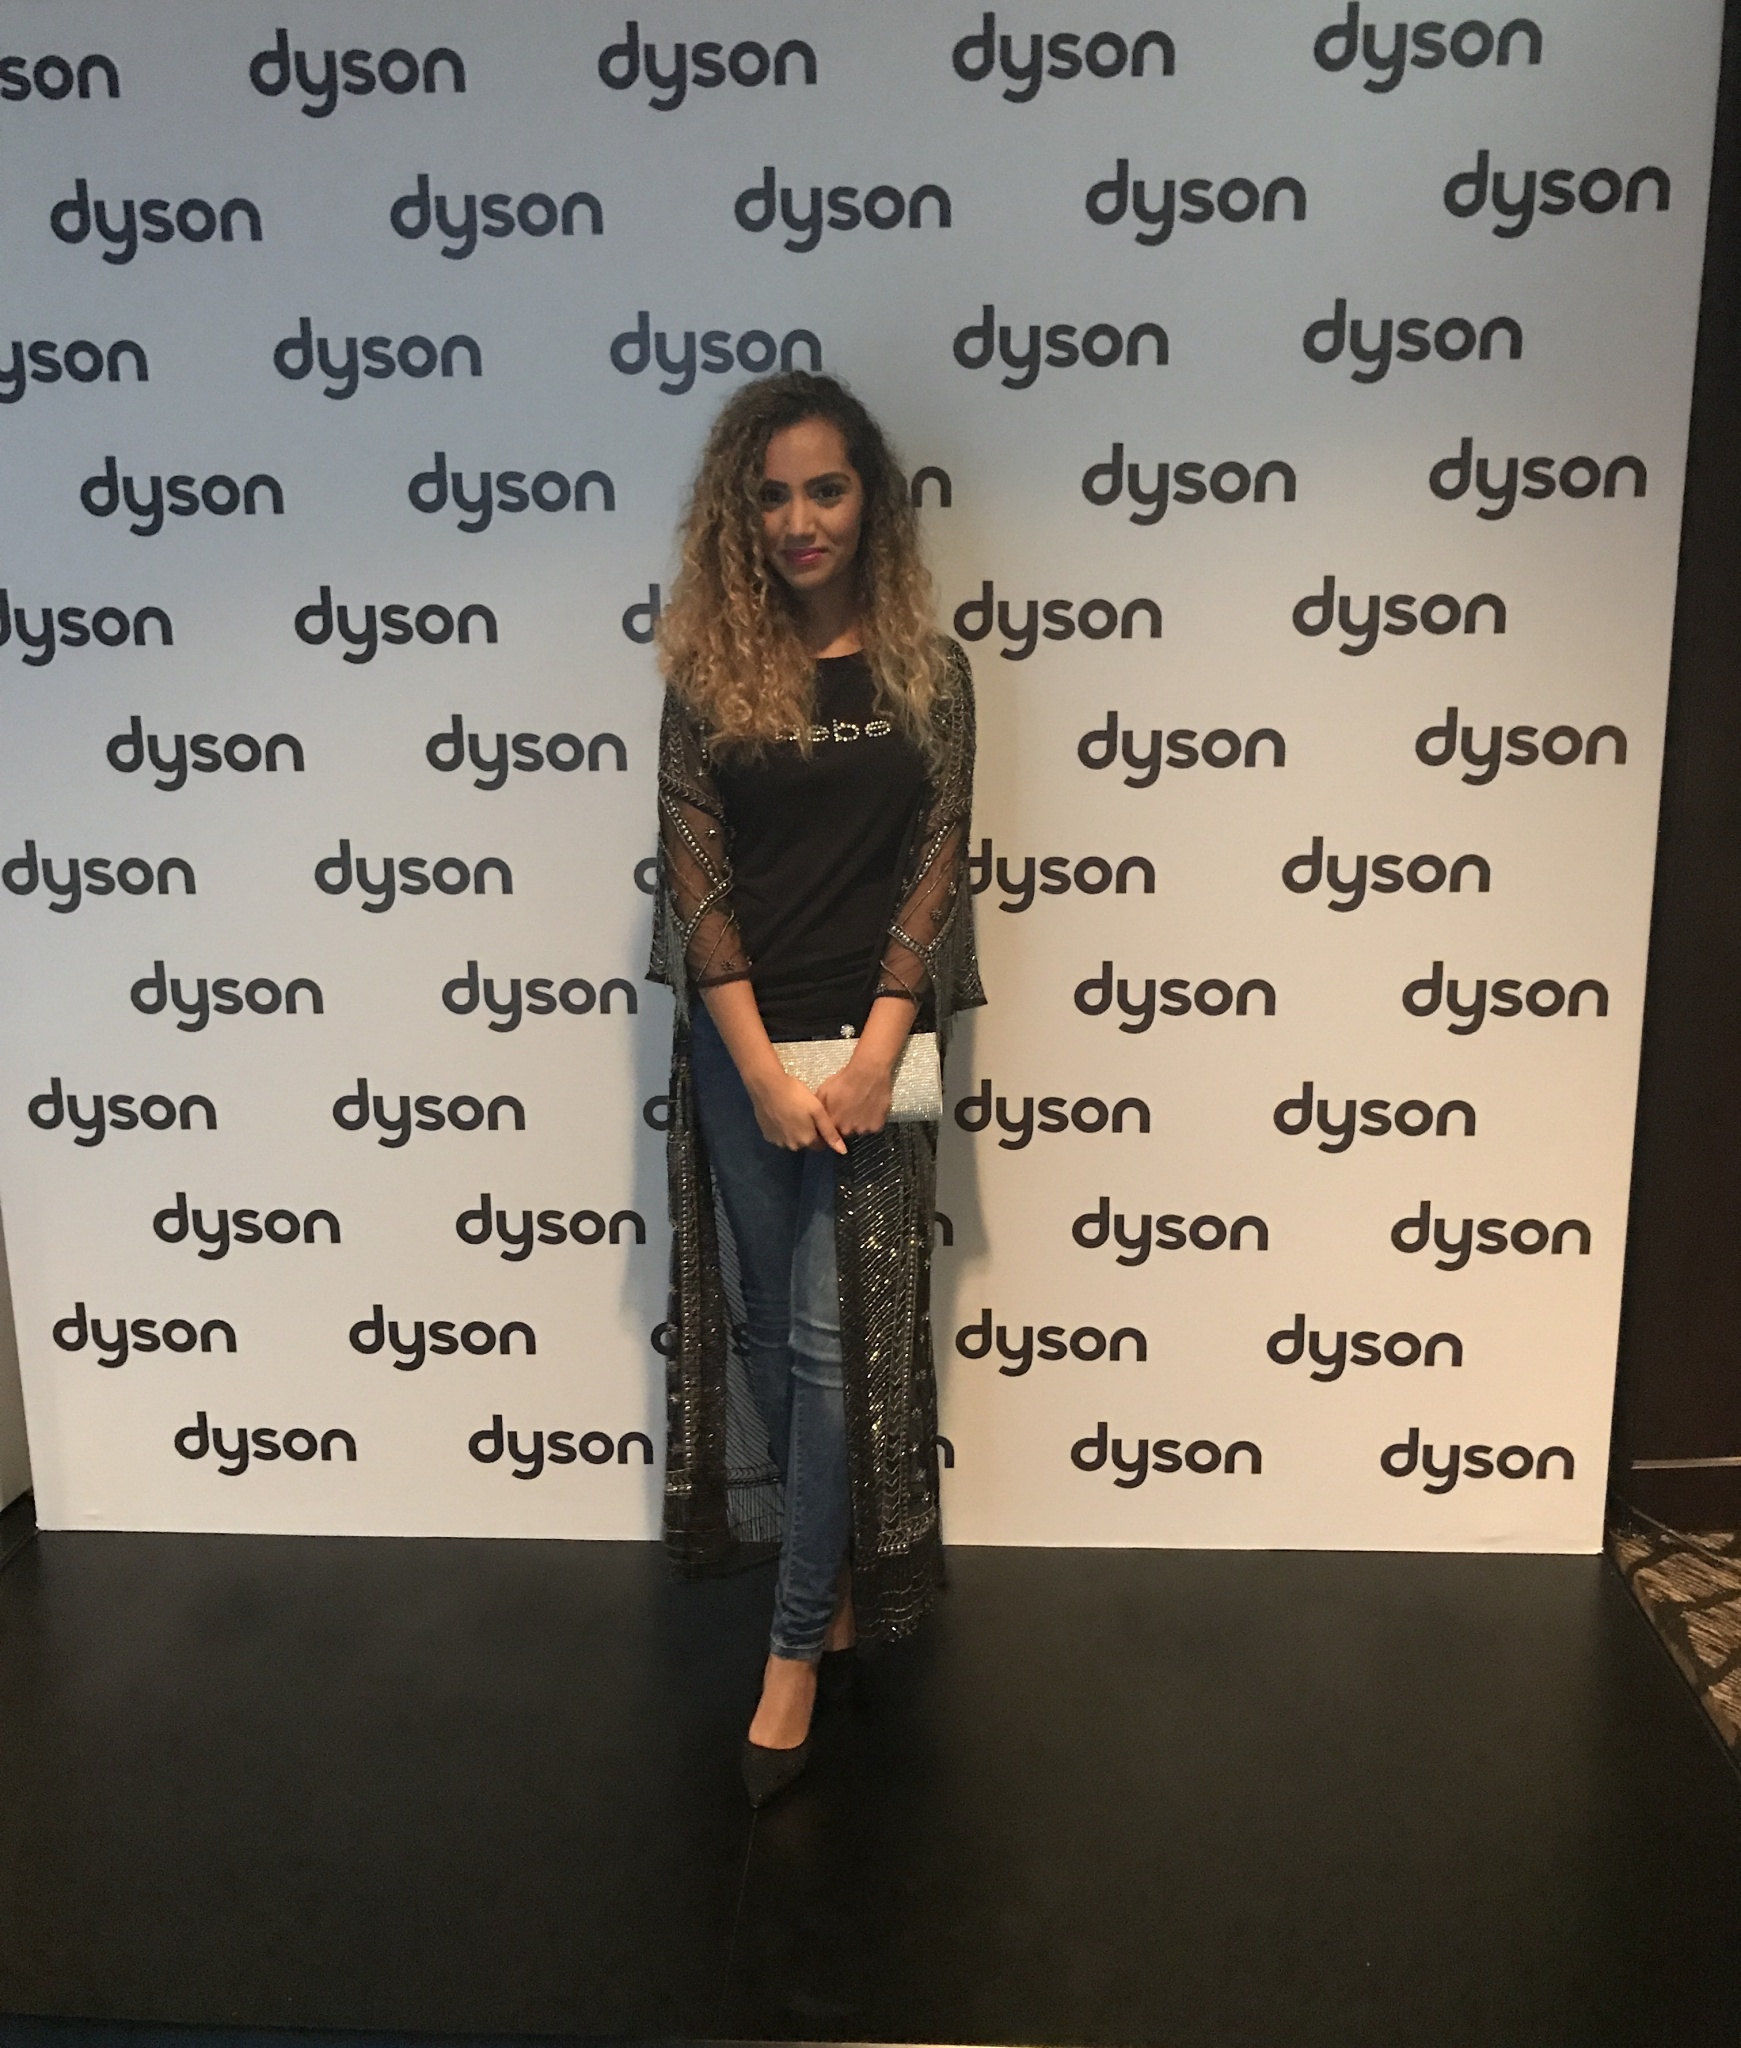 Test and Experience Dyson Technology